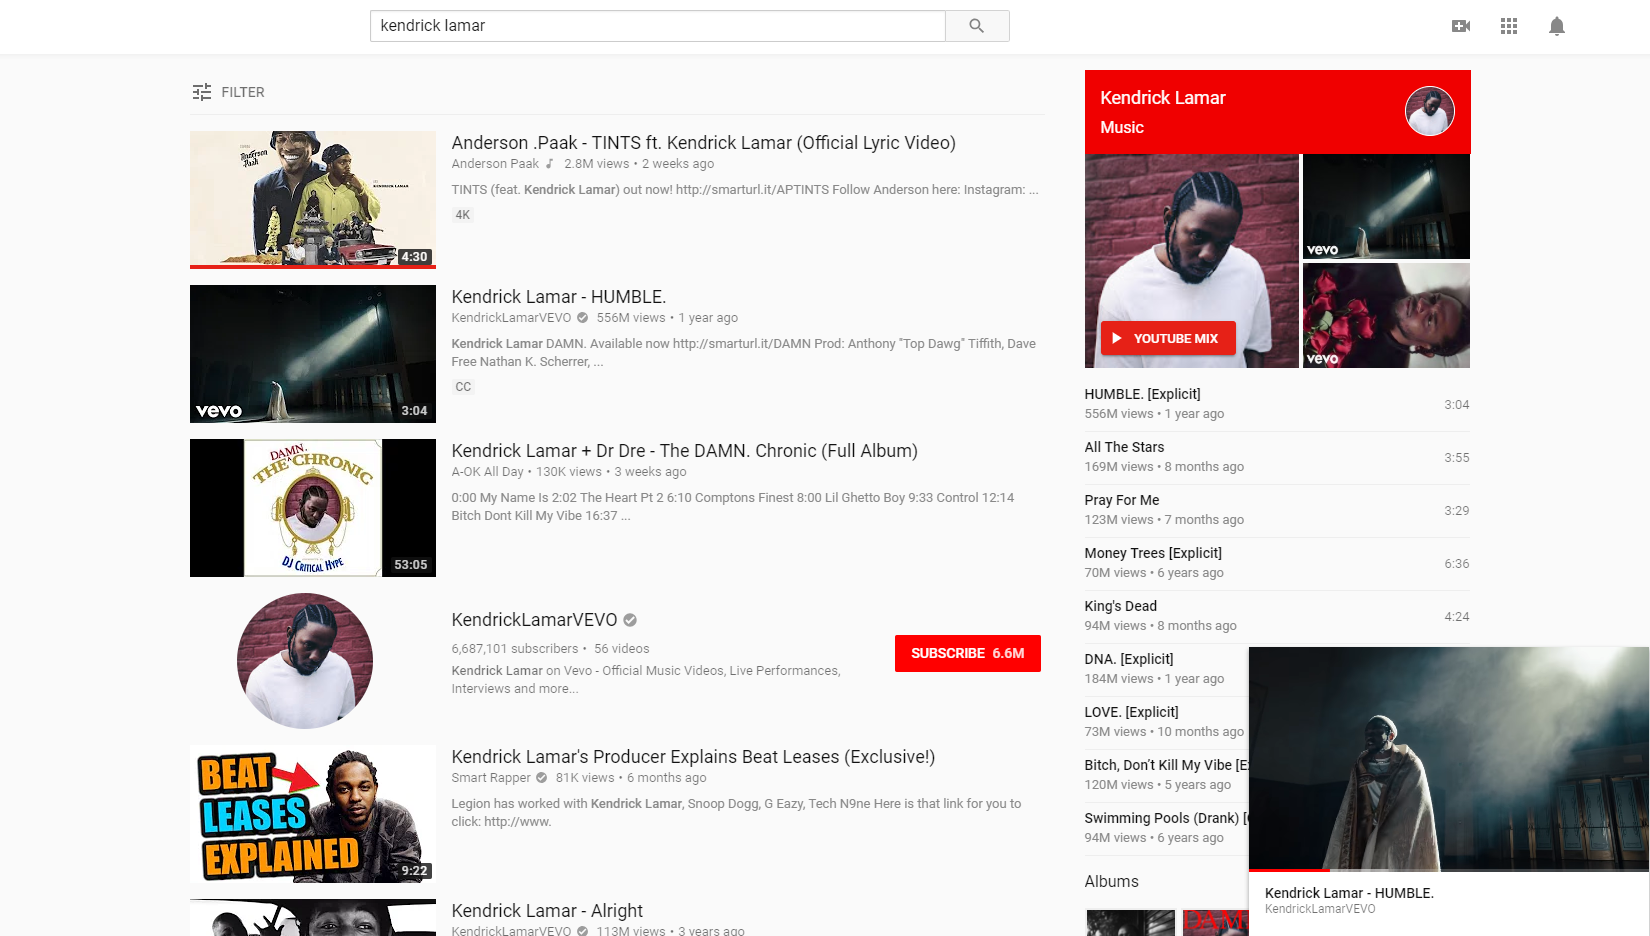 YouTube’s new mini player lets you browse as you watch